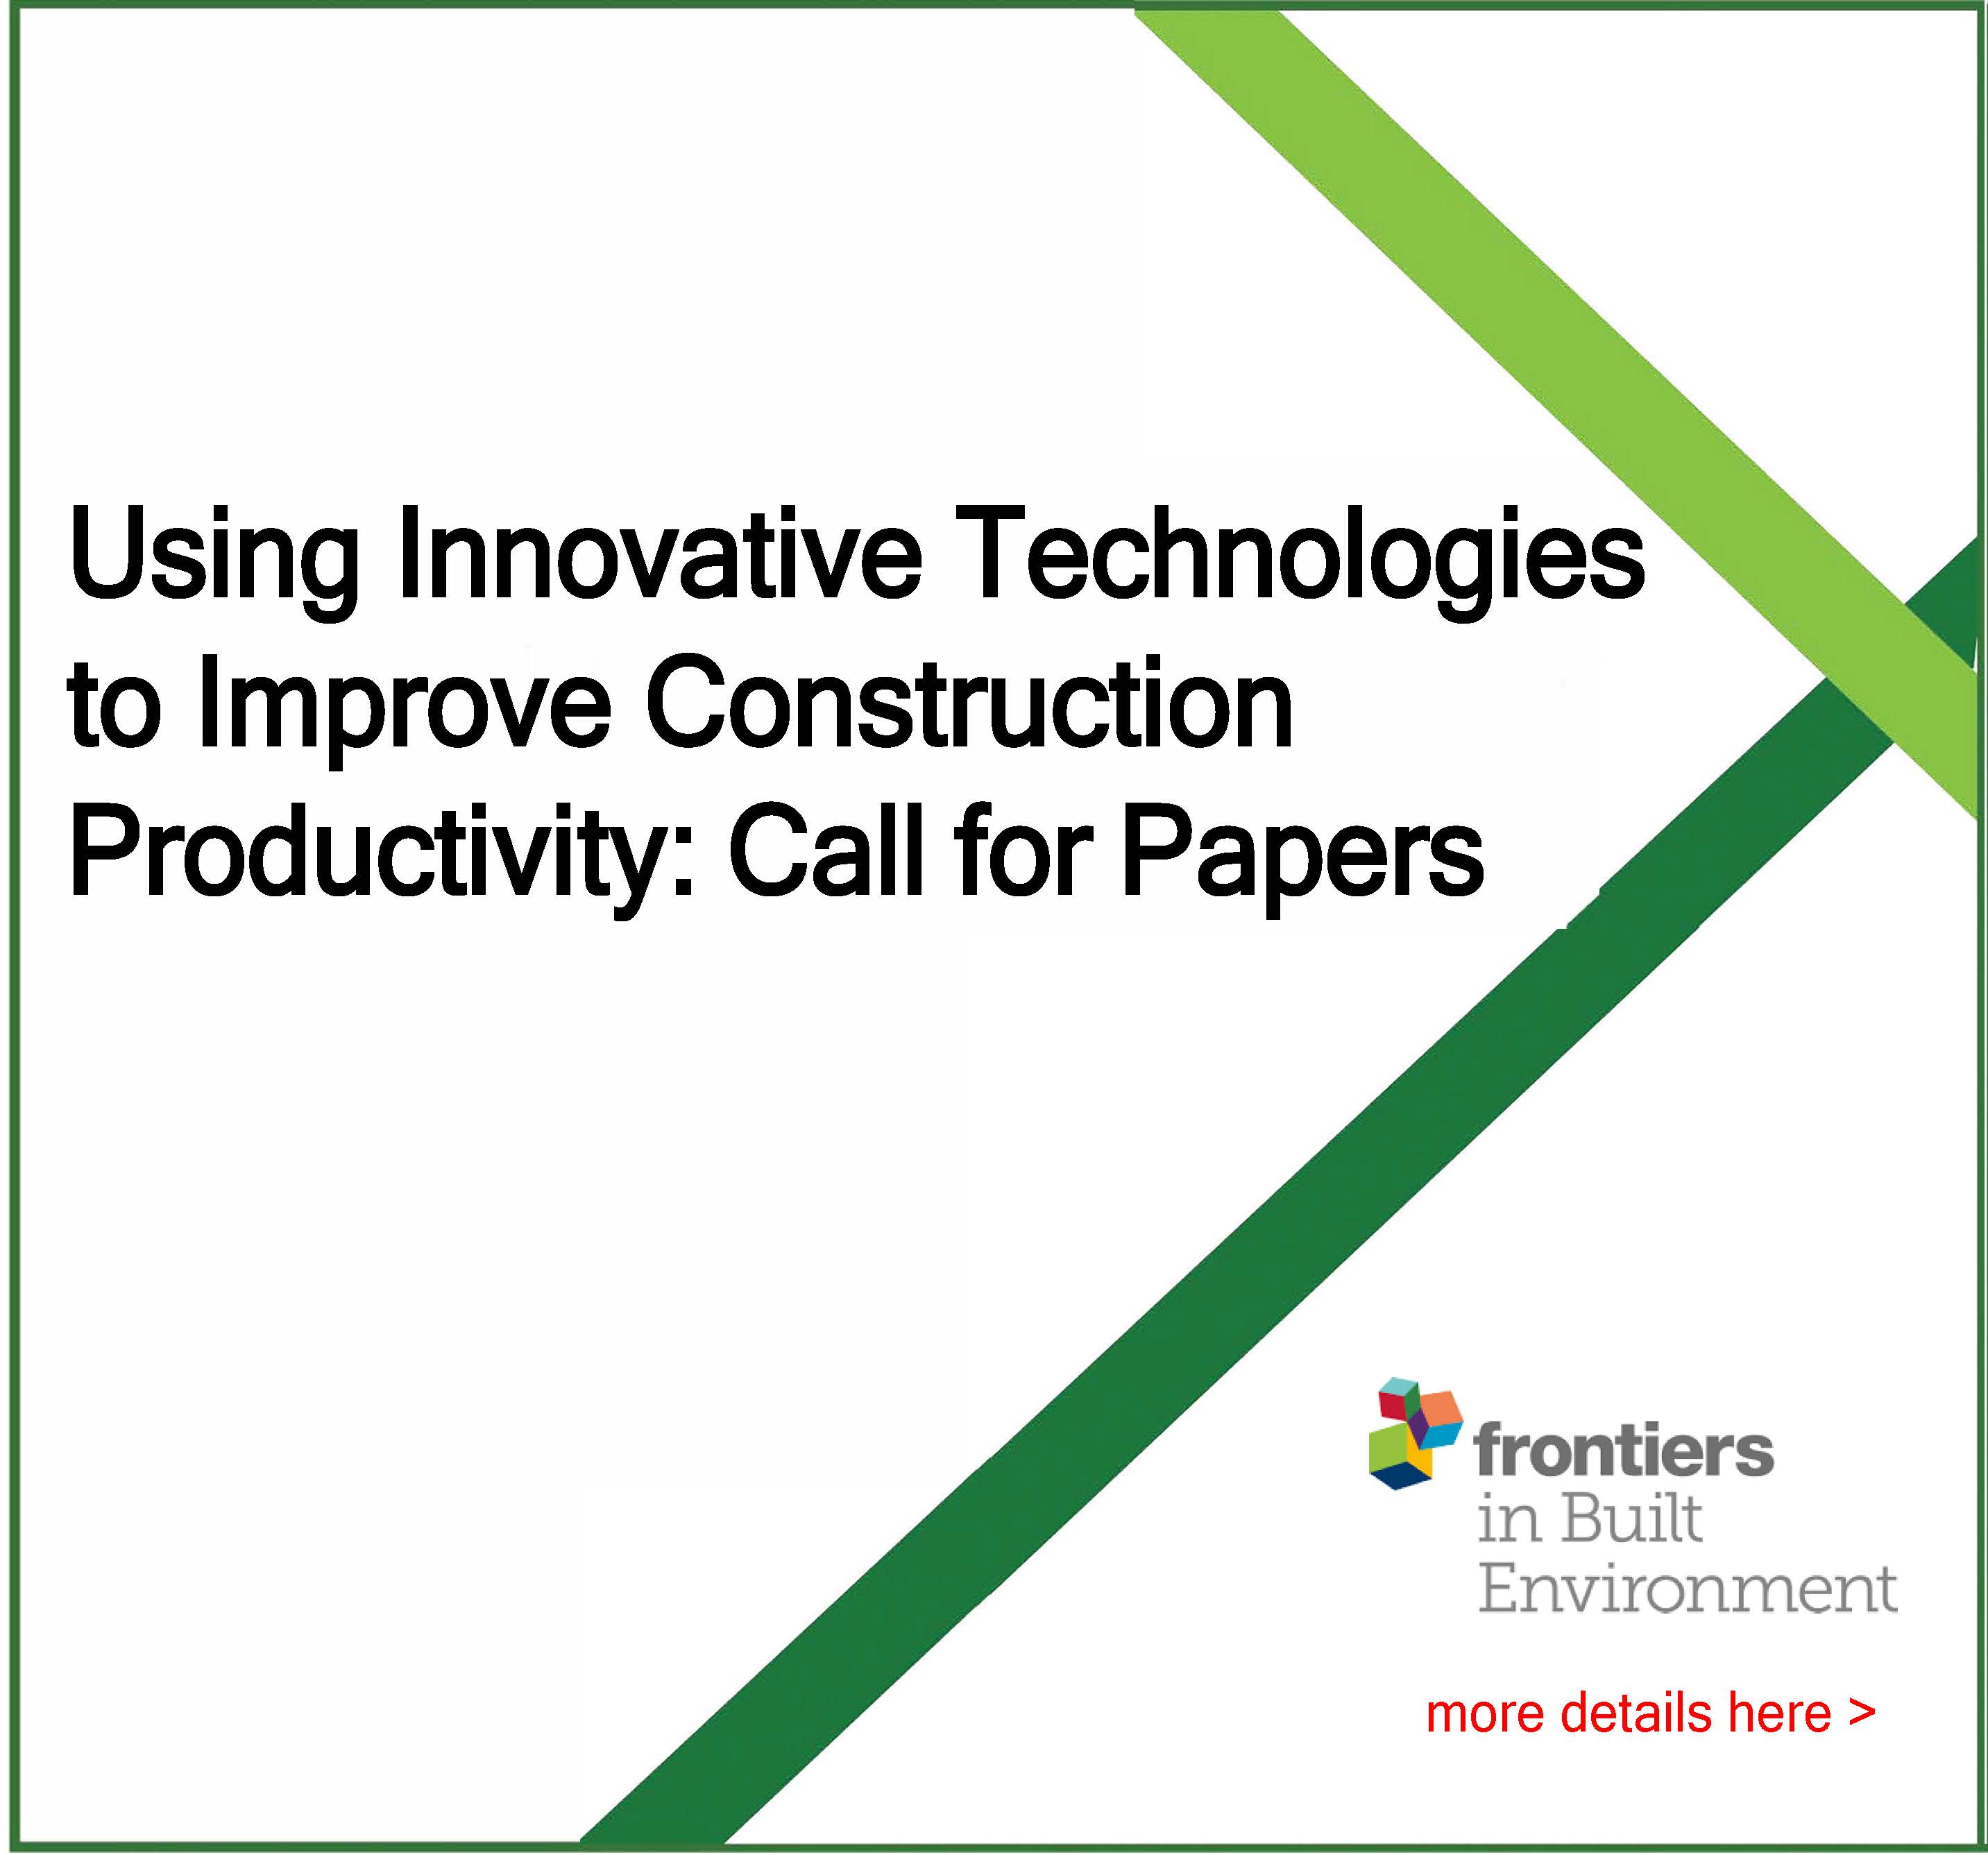 Frontiers in Built Environment on the topic of Using Innovative Technologies to Improve Construction Productivity